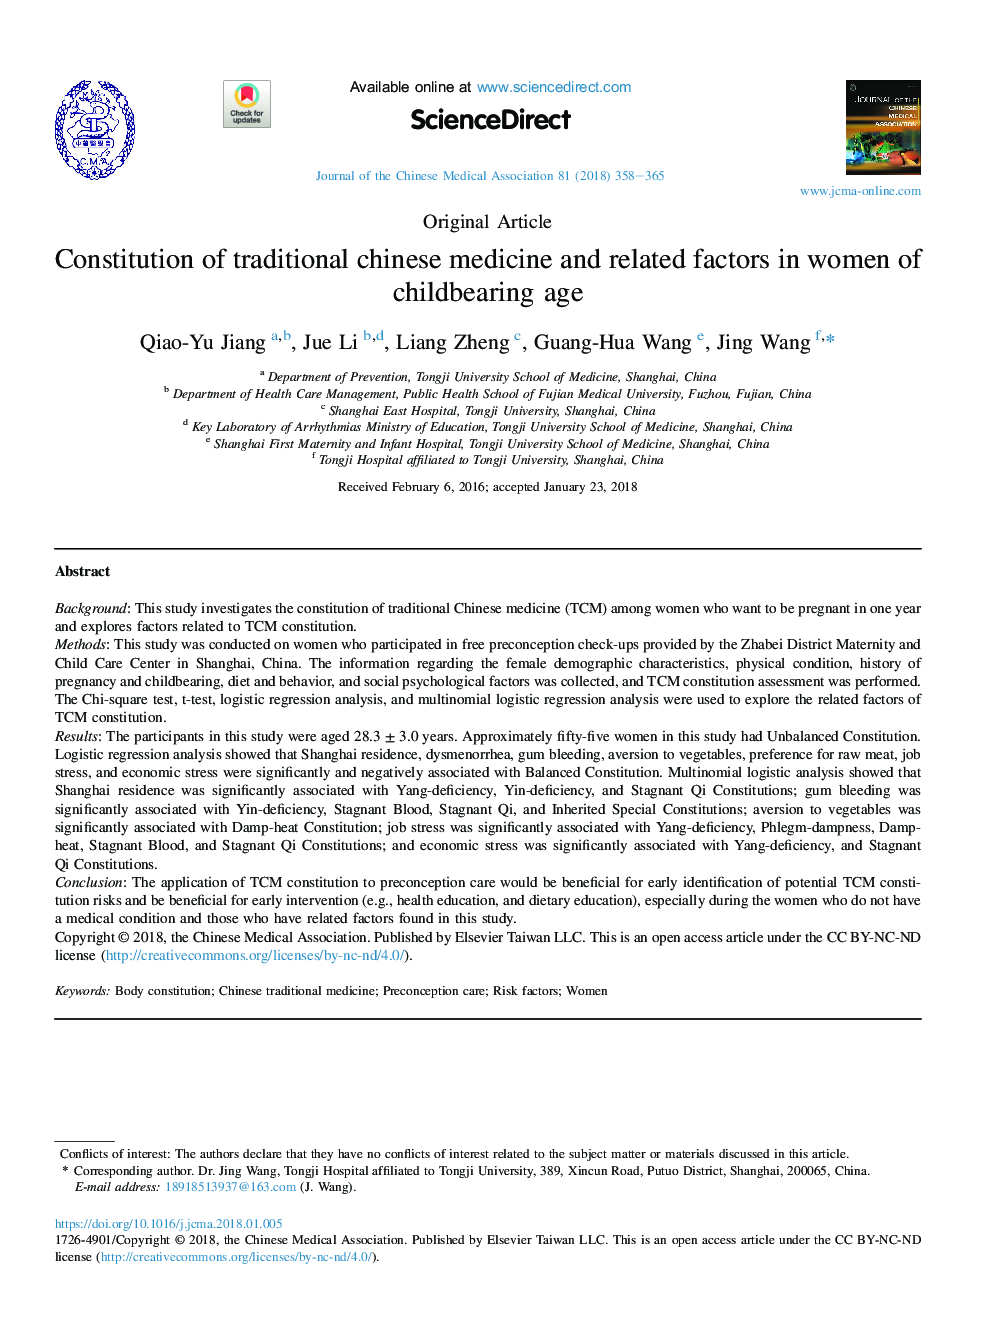 Constitution of traditional chinese medicine and related factors in women of childbearing age